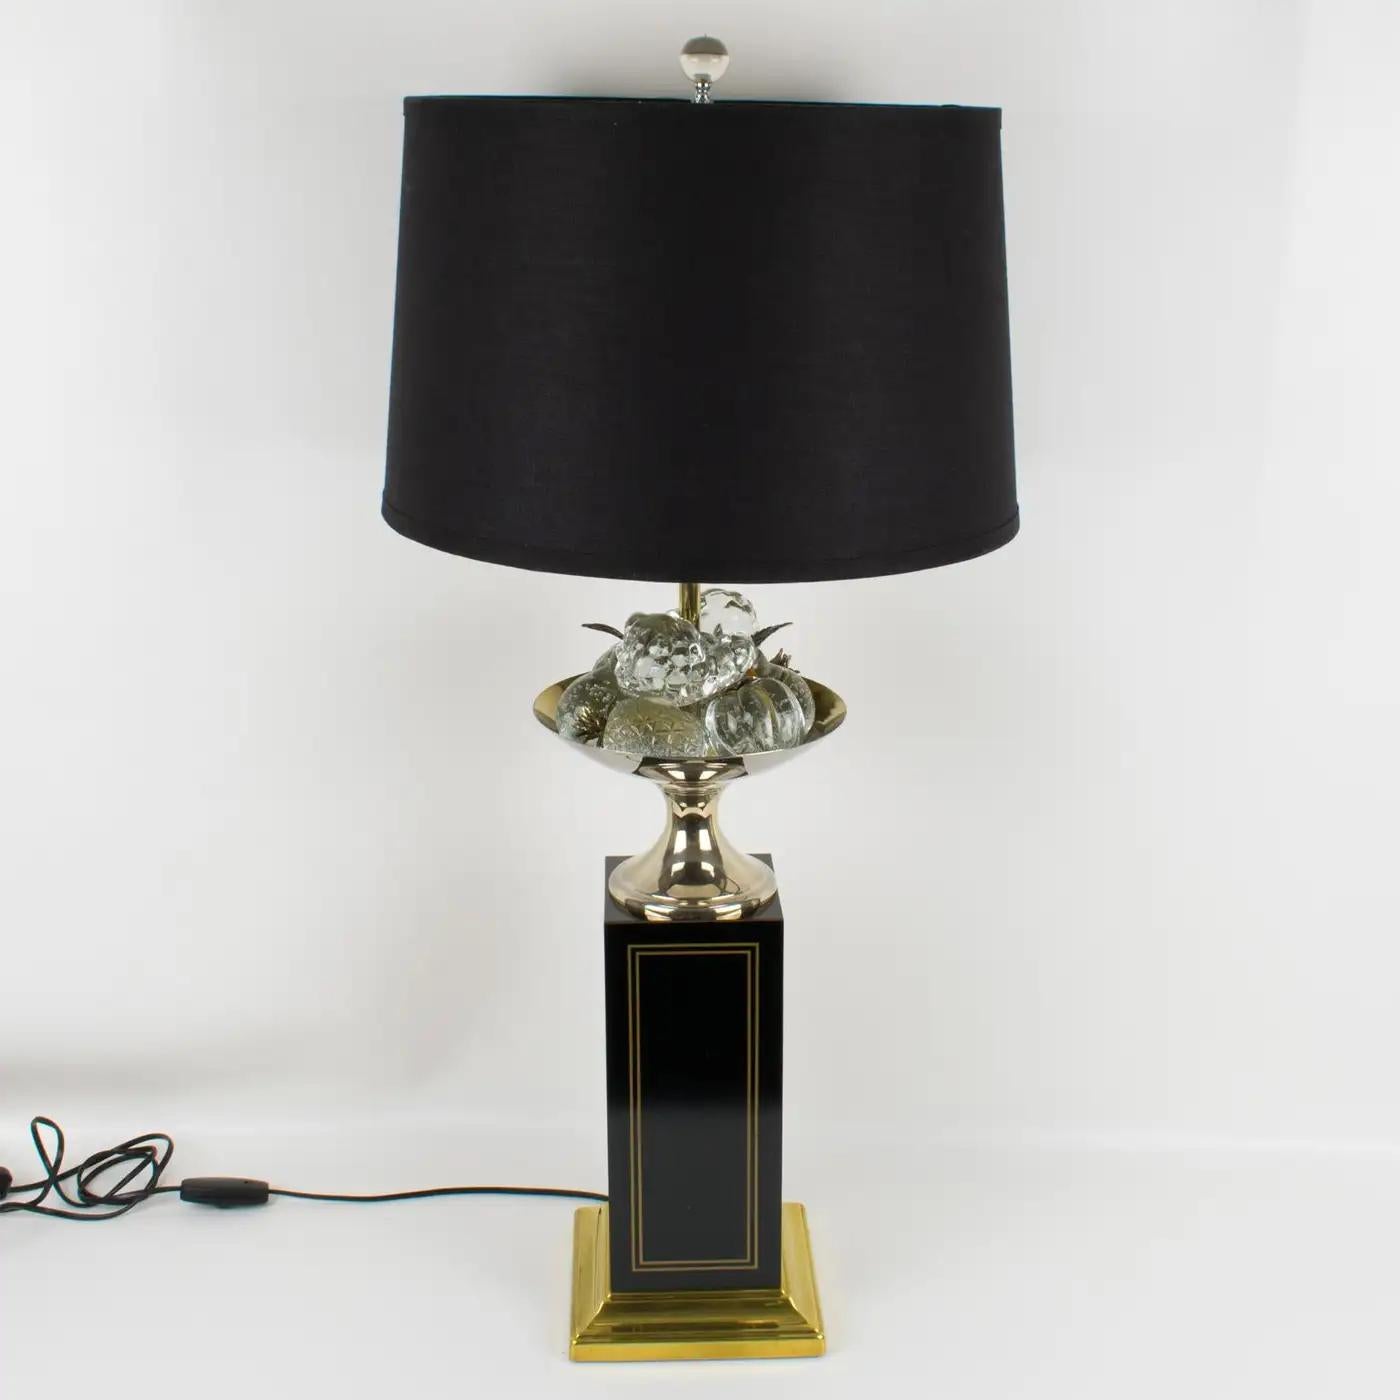 Maison Charles, Paris, designed this stunning decorative tall table lamp. A large black enameled square column with inlaid brass details elevates the entire lighting piece. The lamp is topped with a brass bowl holding crystal fruits with brass stems